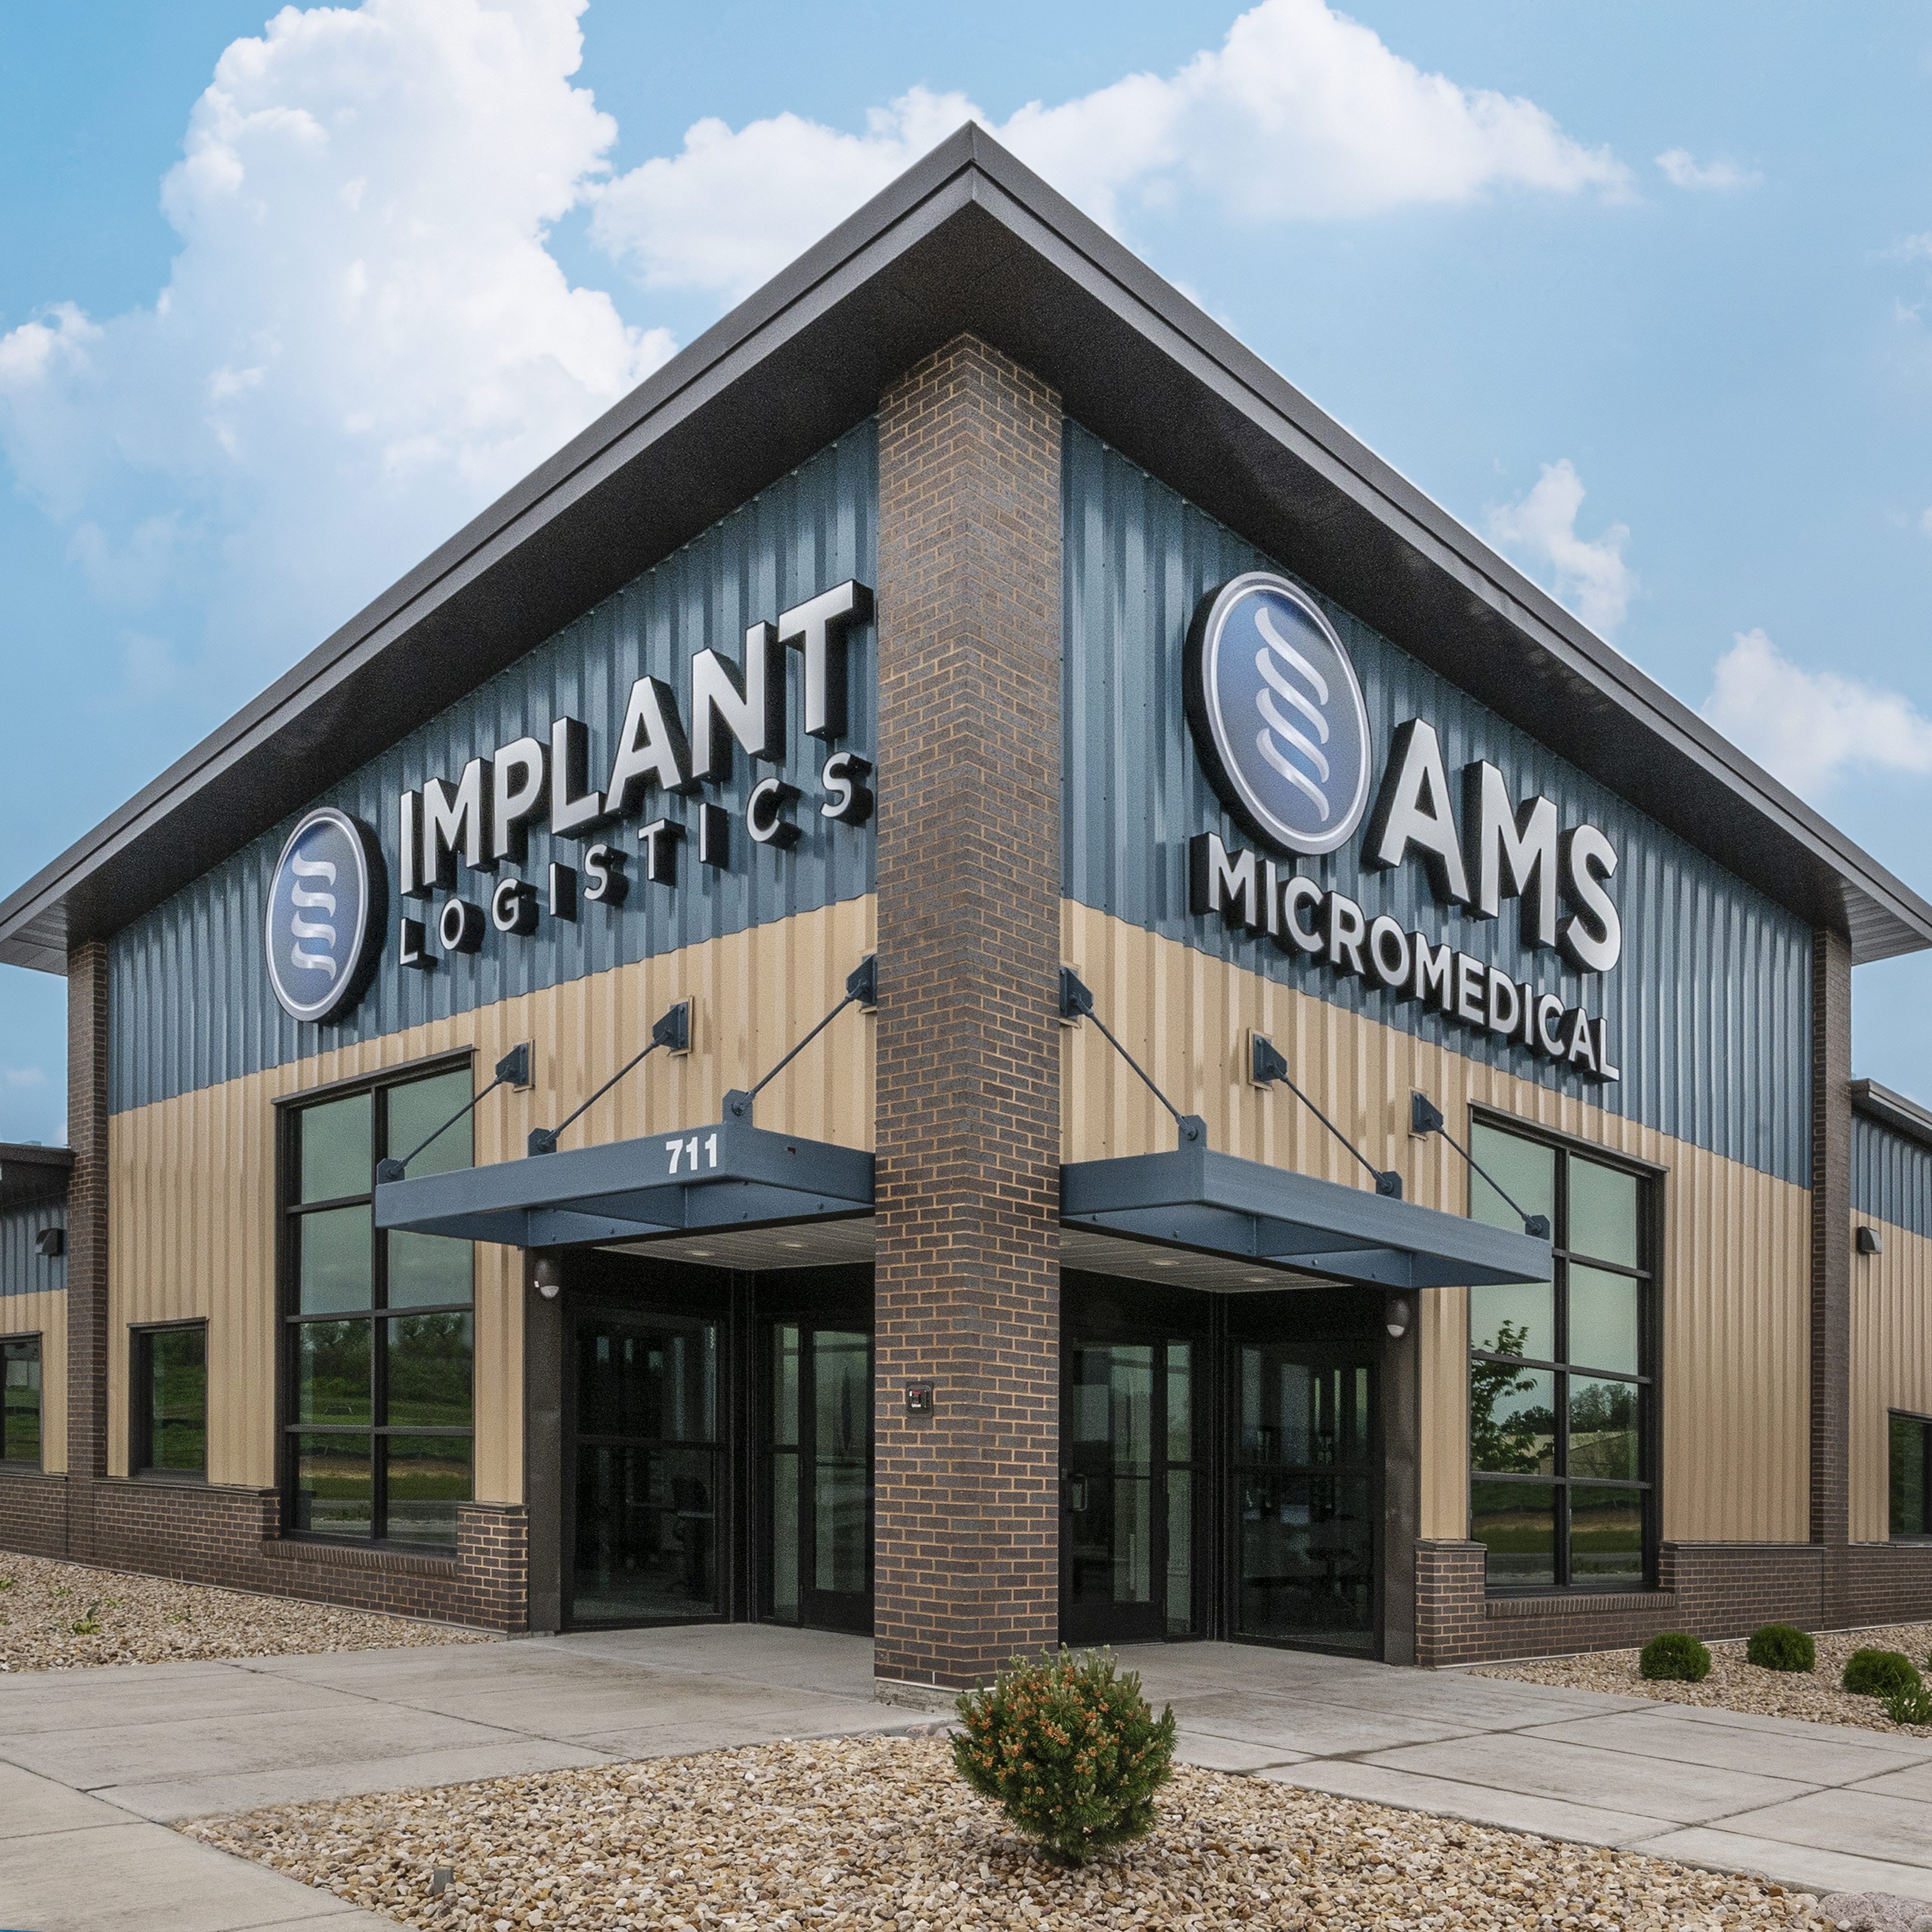 Exterior of Implant Logistics and AMS Micromedical building showing signage